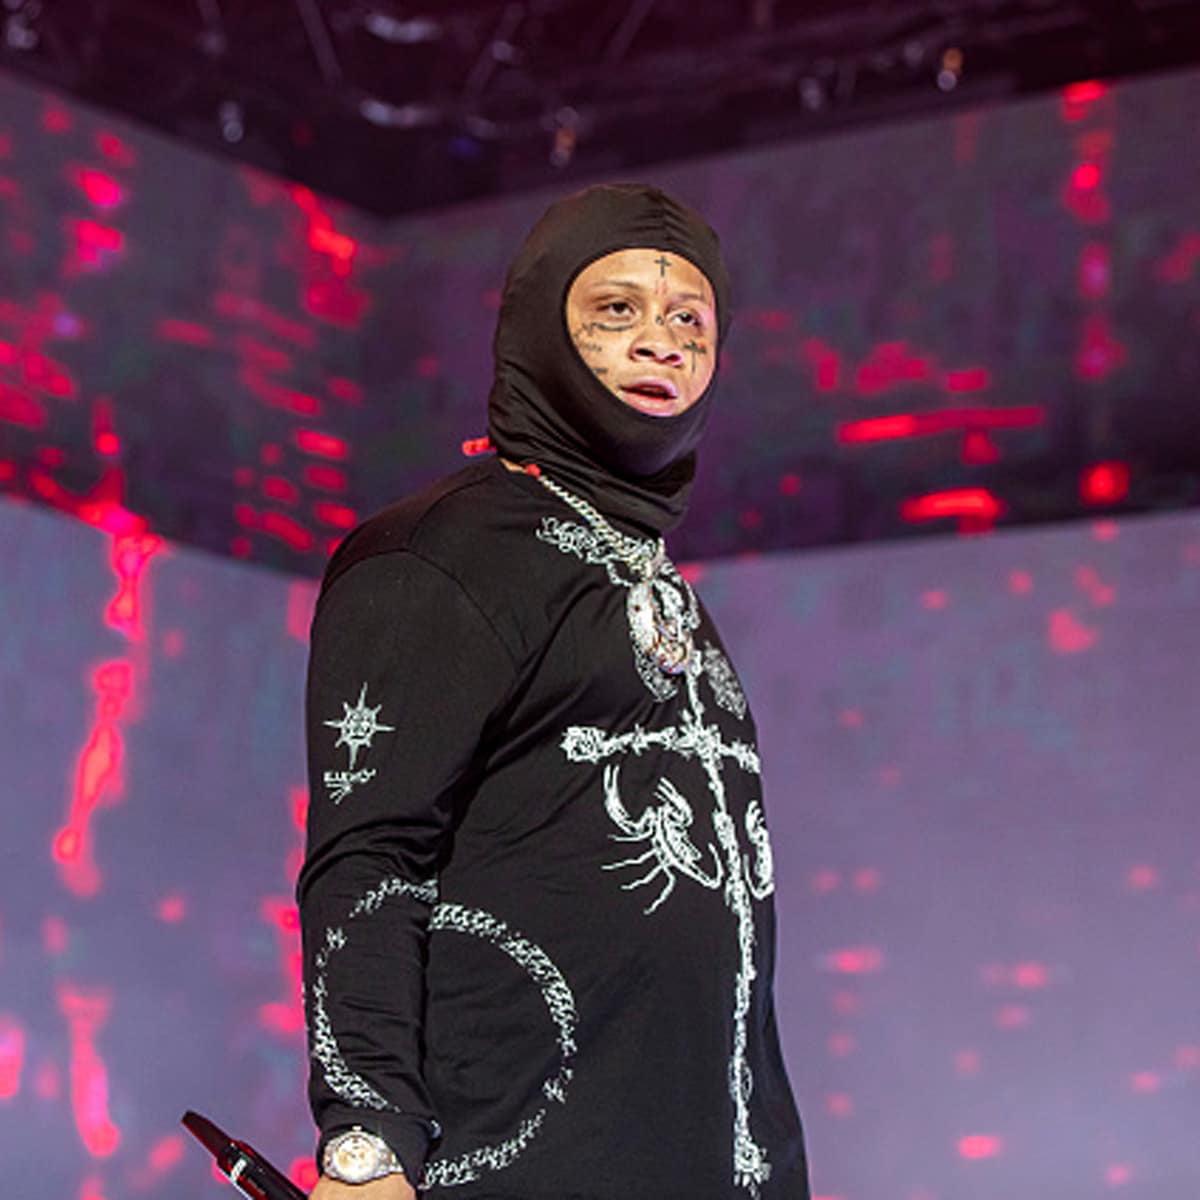 rapper trippie redd performs during his tripp at knight tour